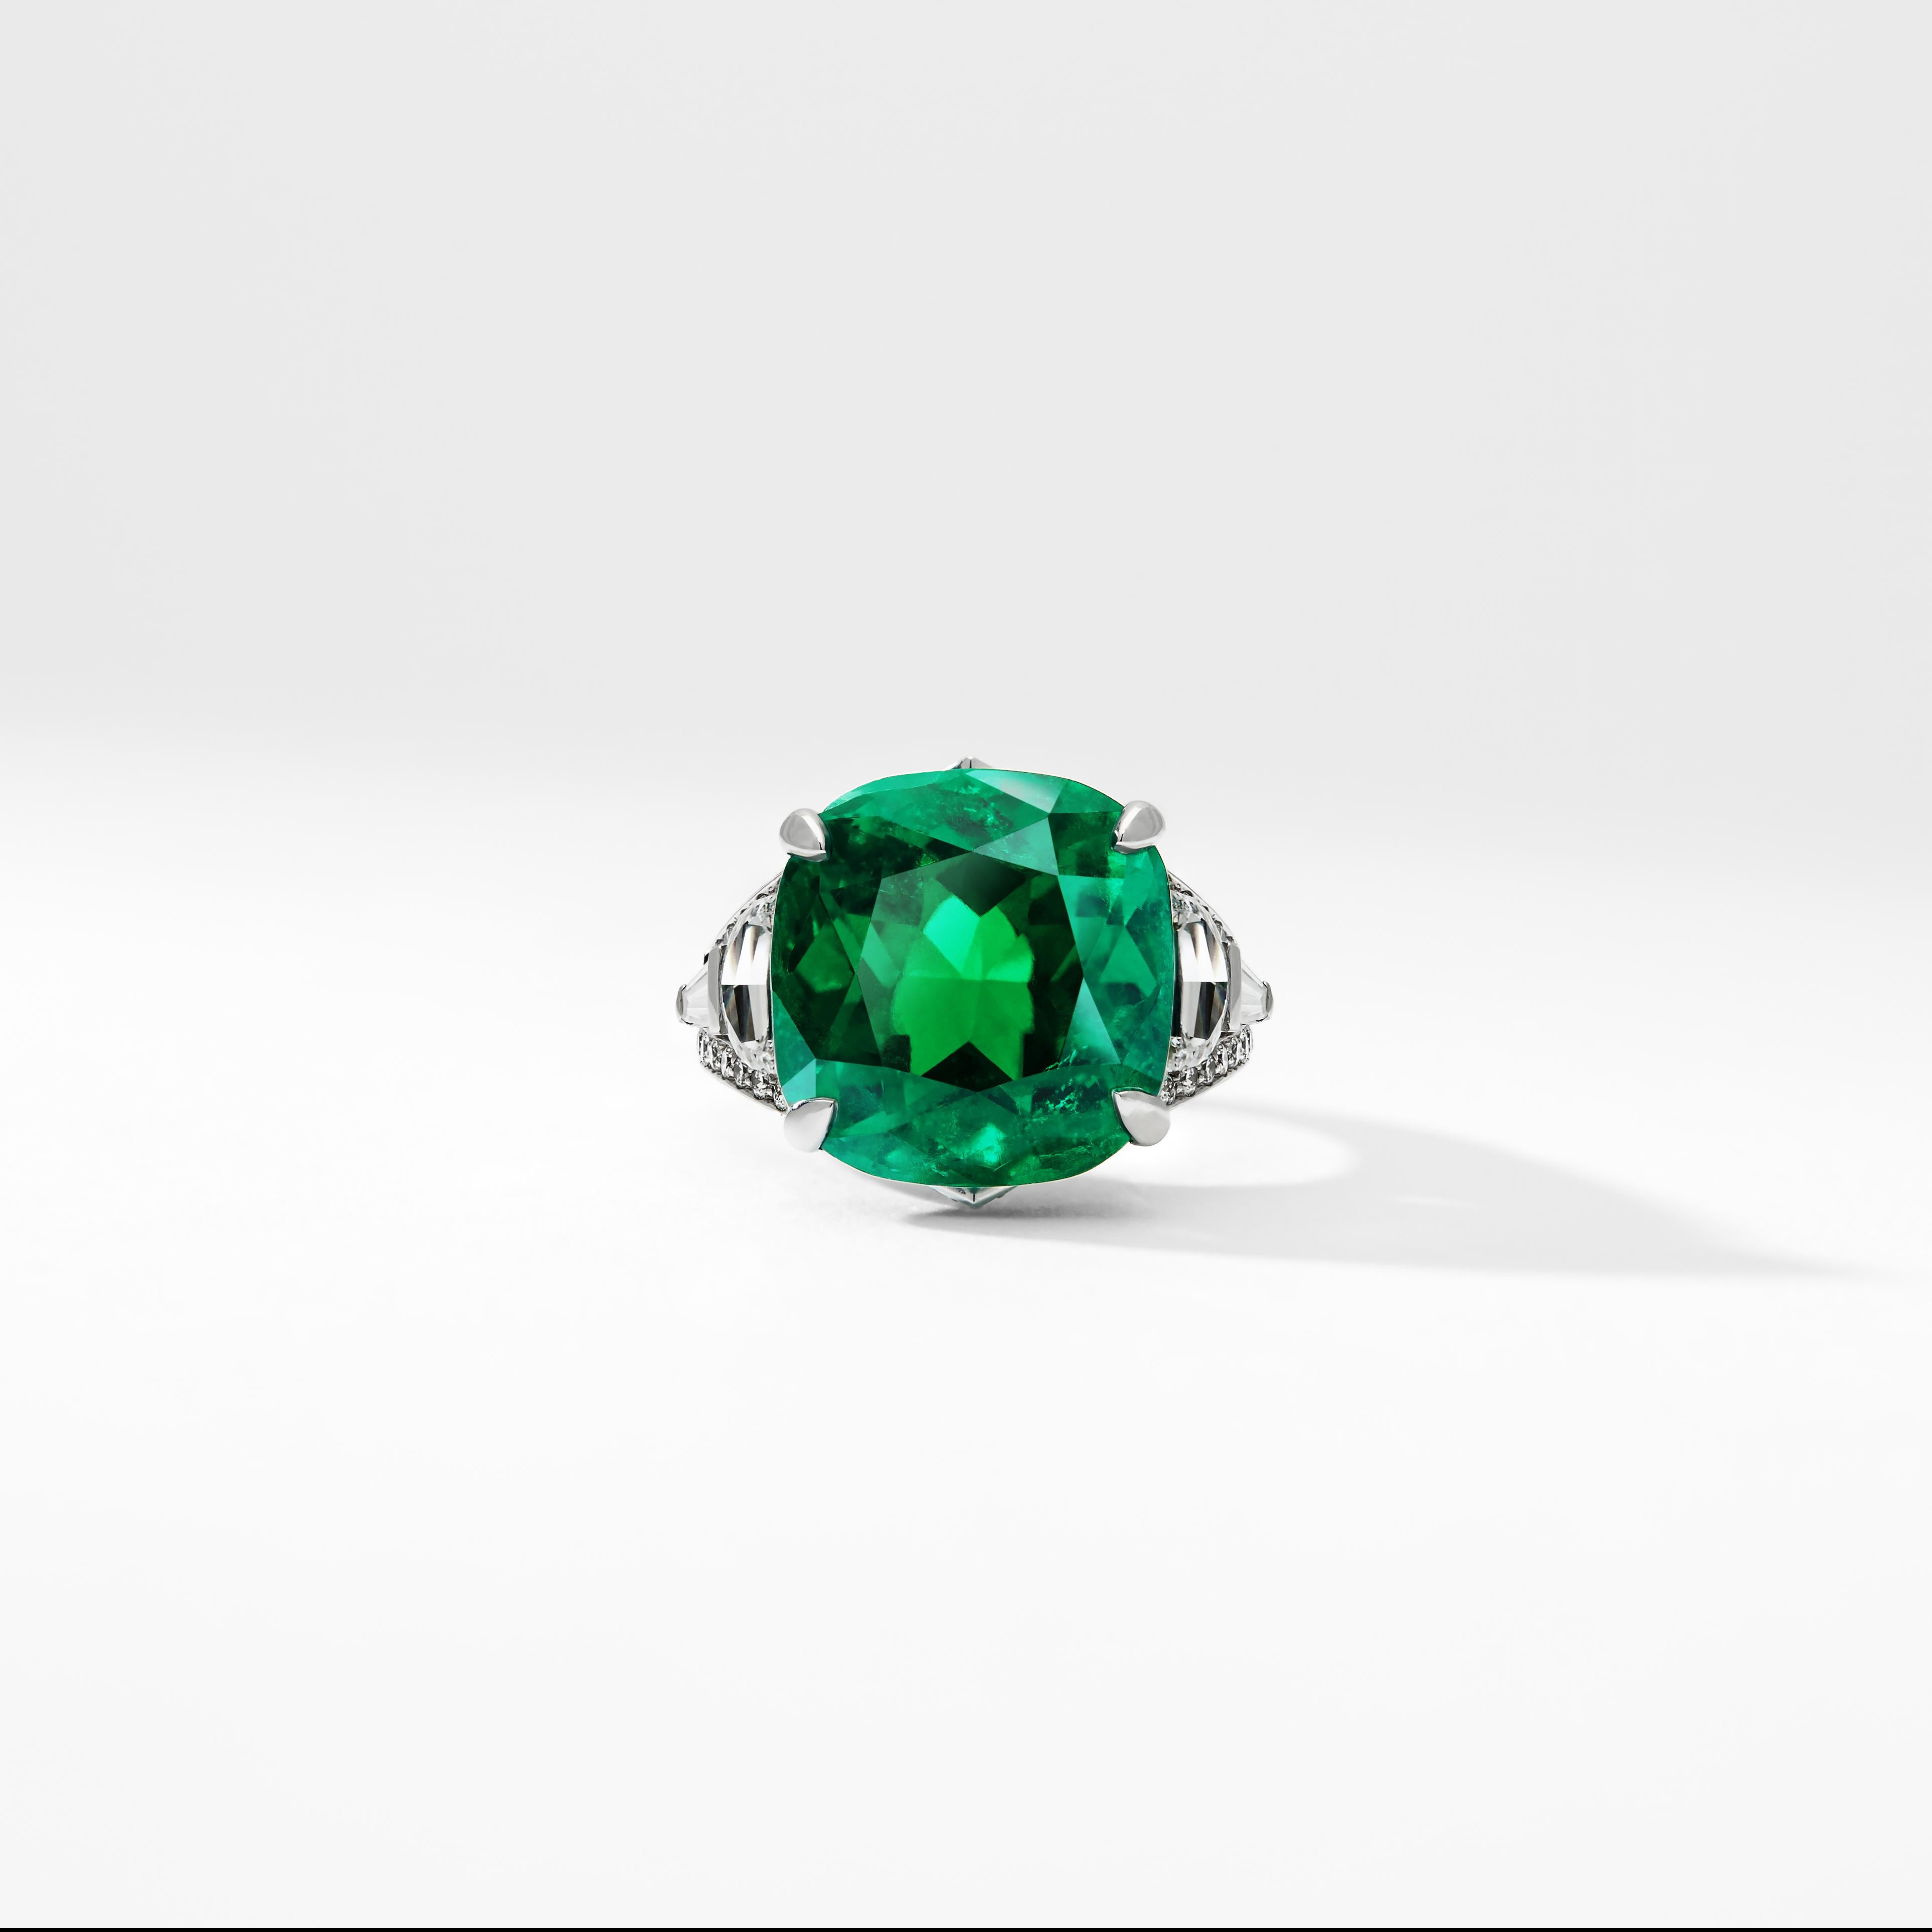 Fabergé Platinum 13.69ct Cushion Cut Emerald Ring Set With White Diamonds In New Condition For Sale In London, GB